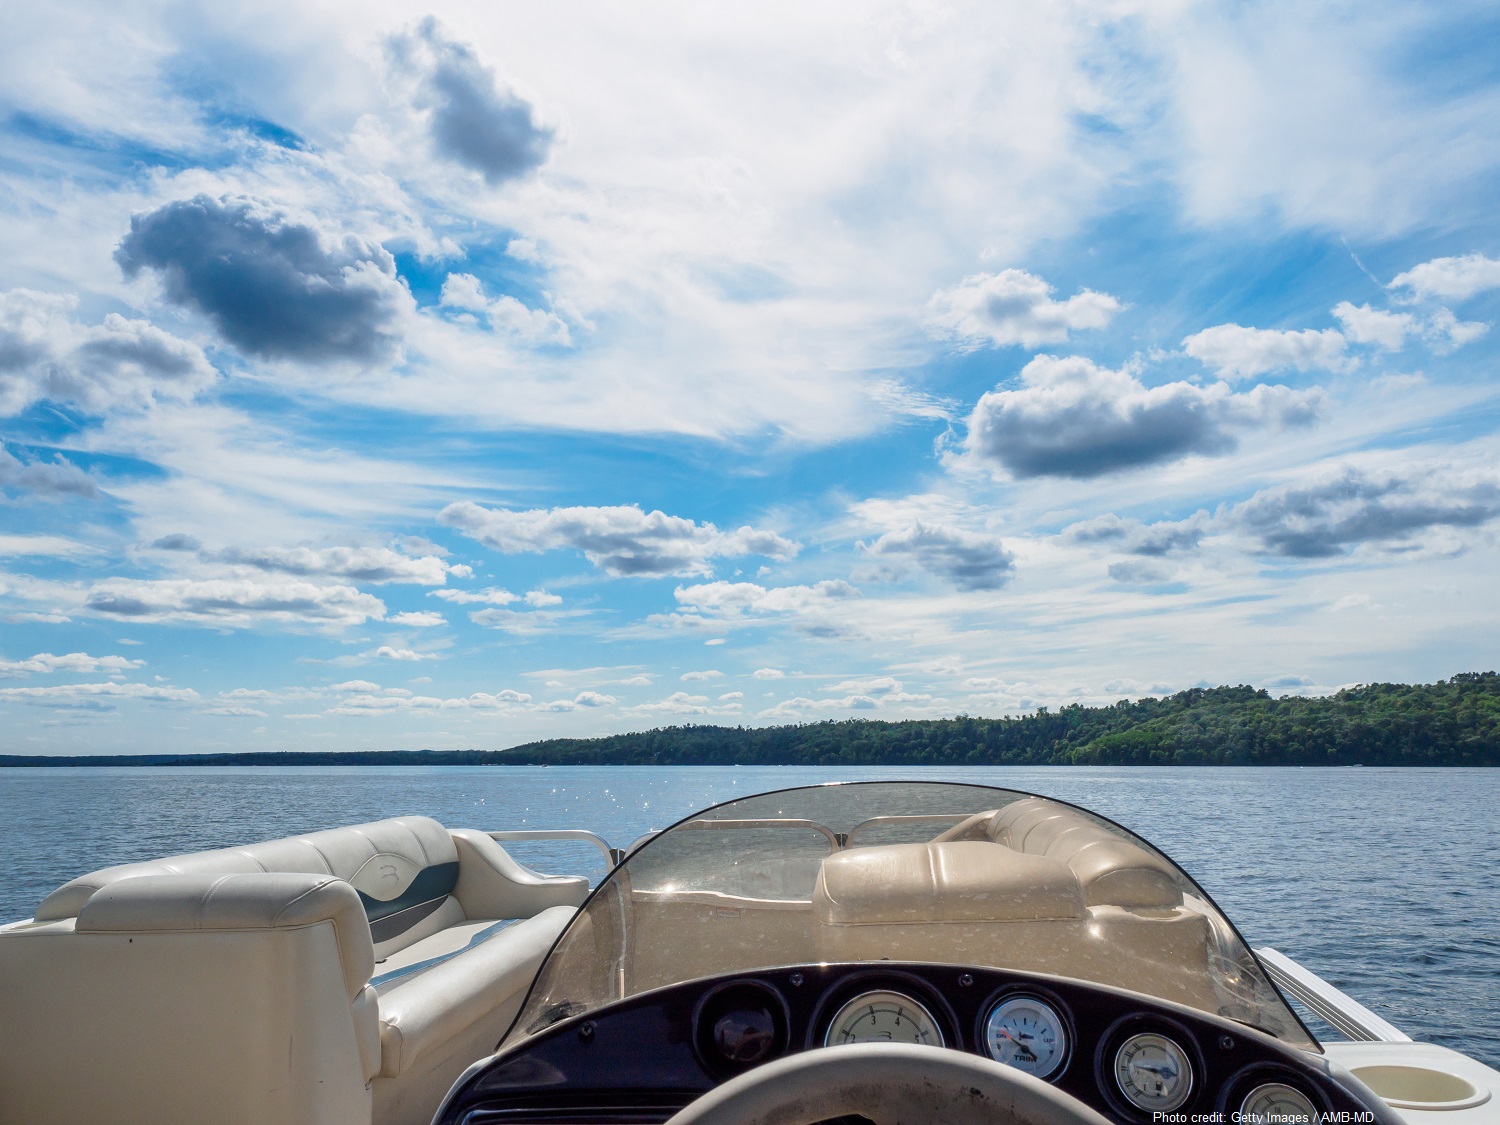 Here Are the Best Boat Rentals at Lake Wallenpaupack